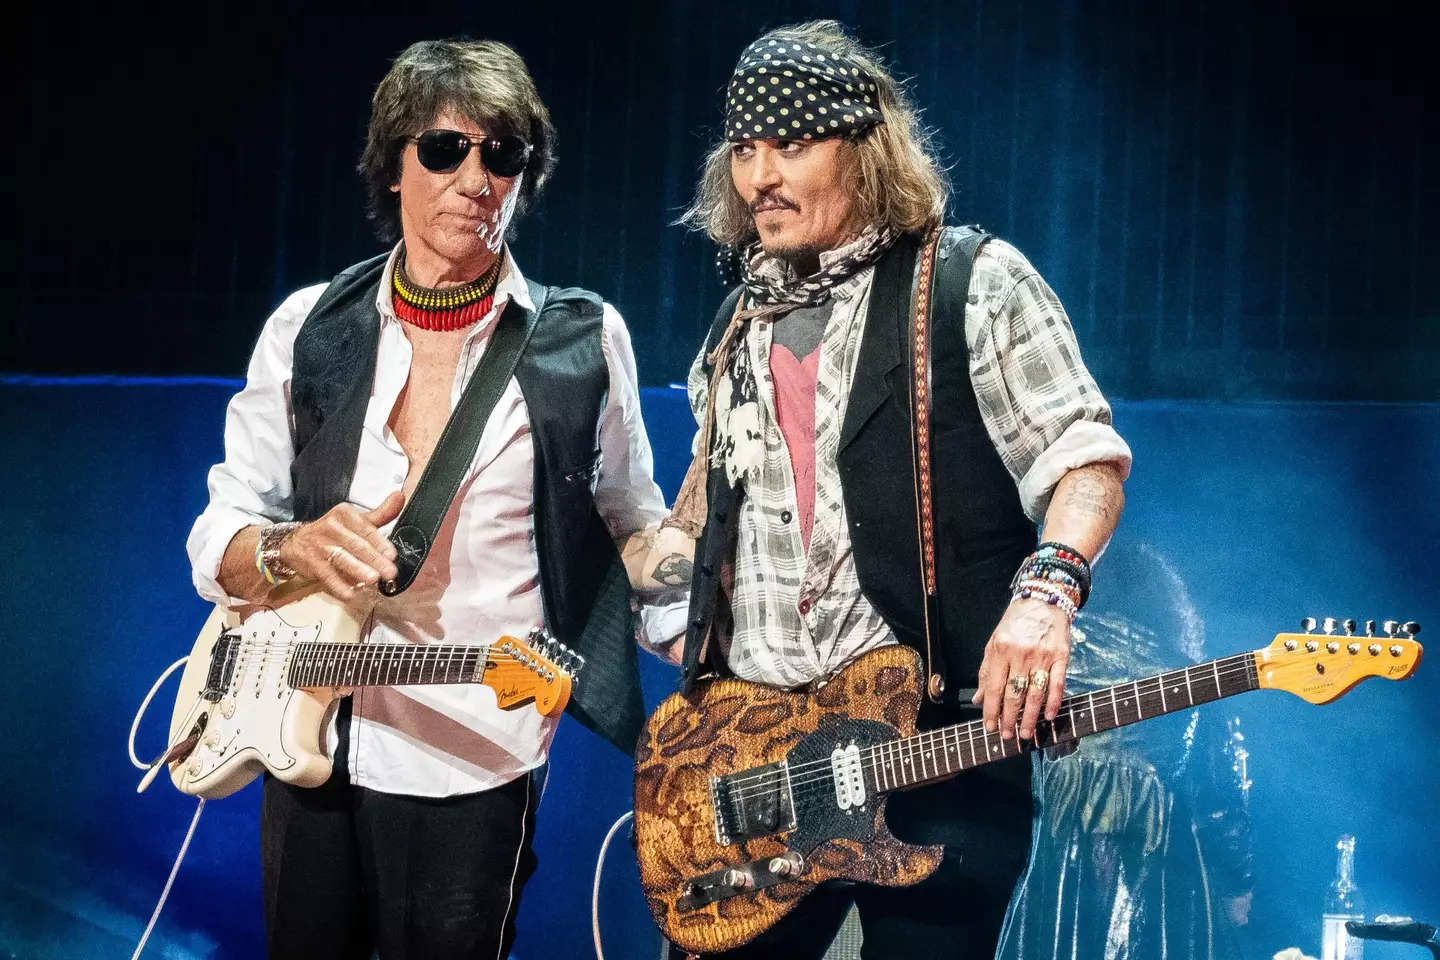 Johnny Depp has joined Jeff Beck on tour following the trial.